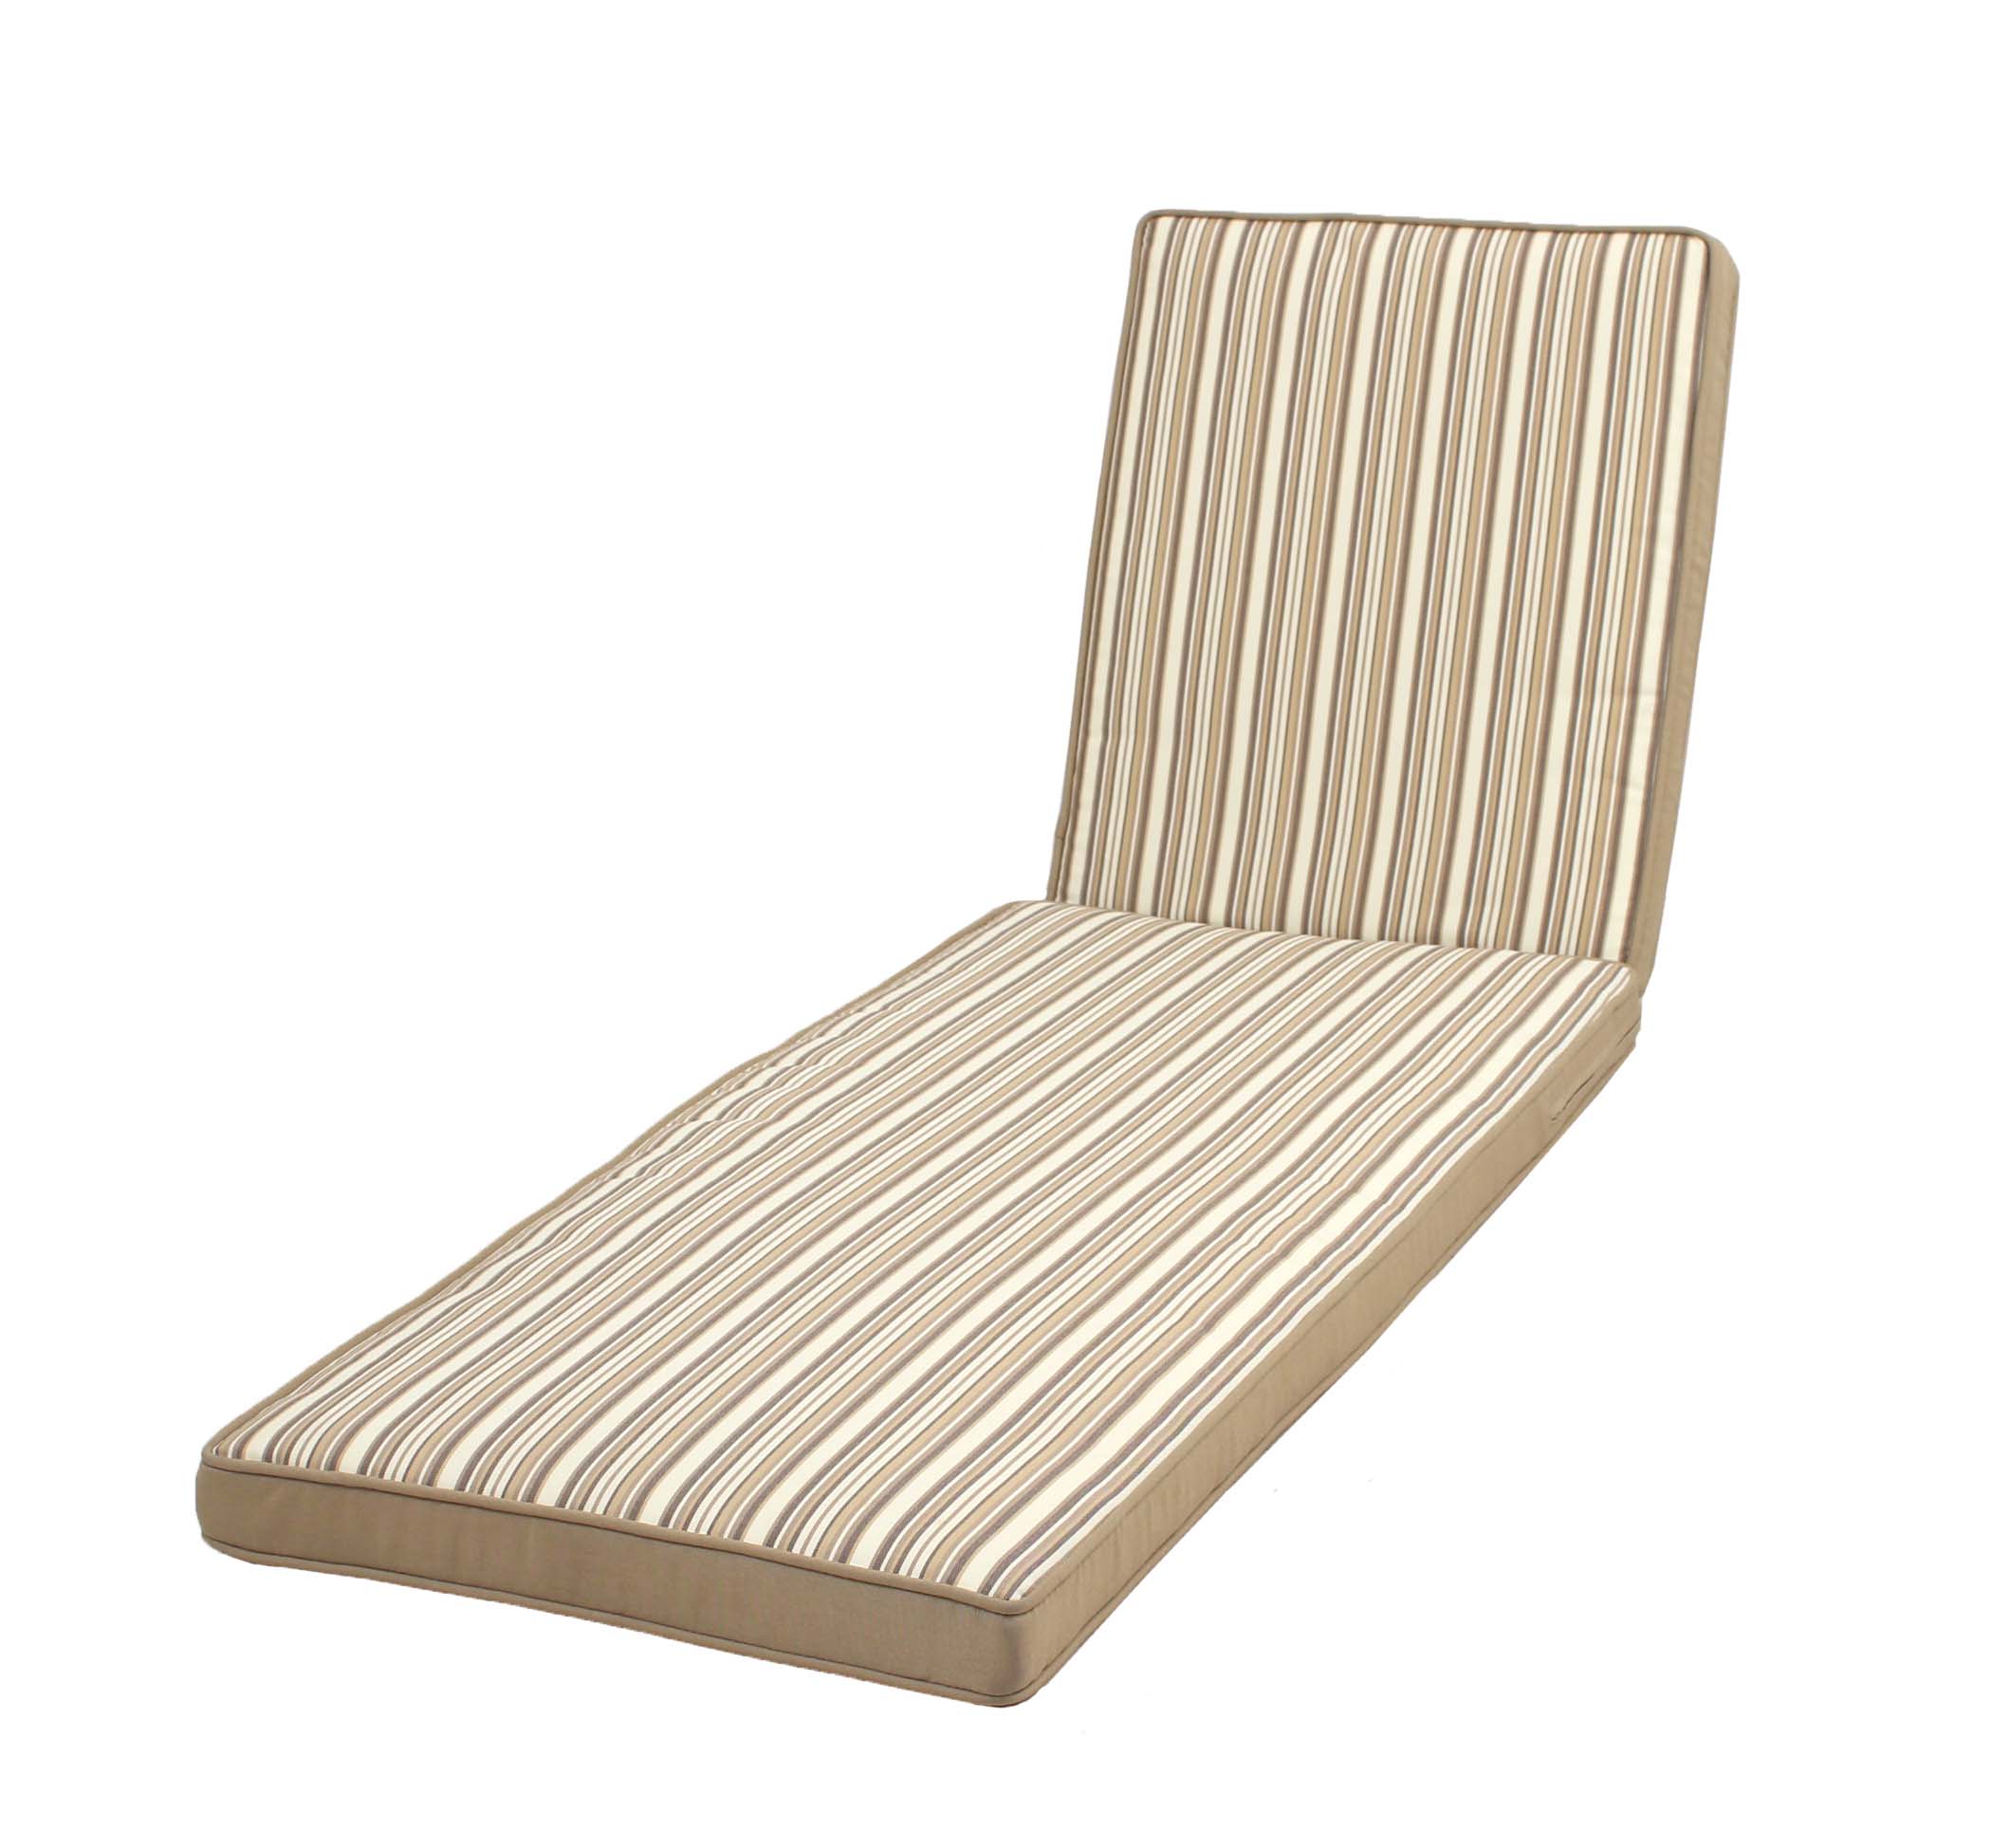 Ty Pennington Style Mayfield Replacement Patio Chaise ...